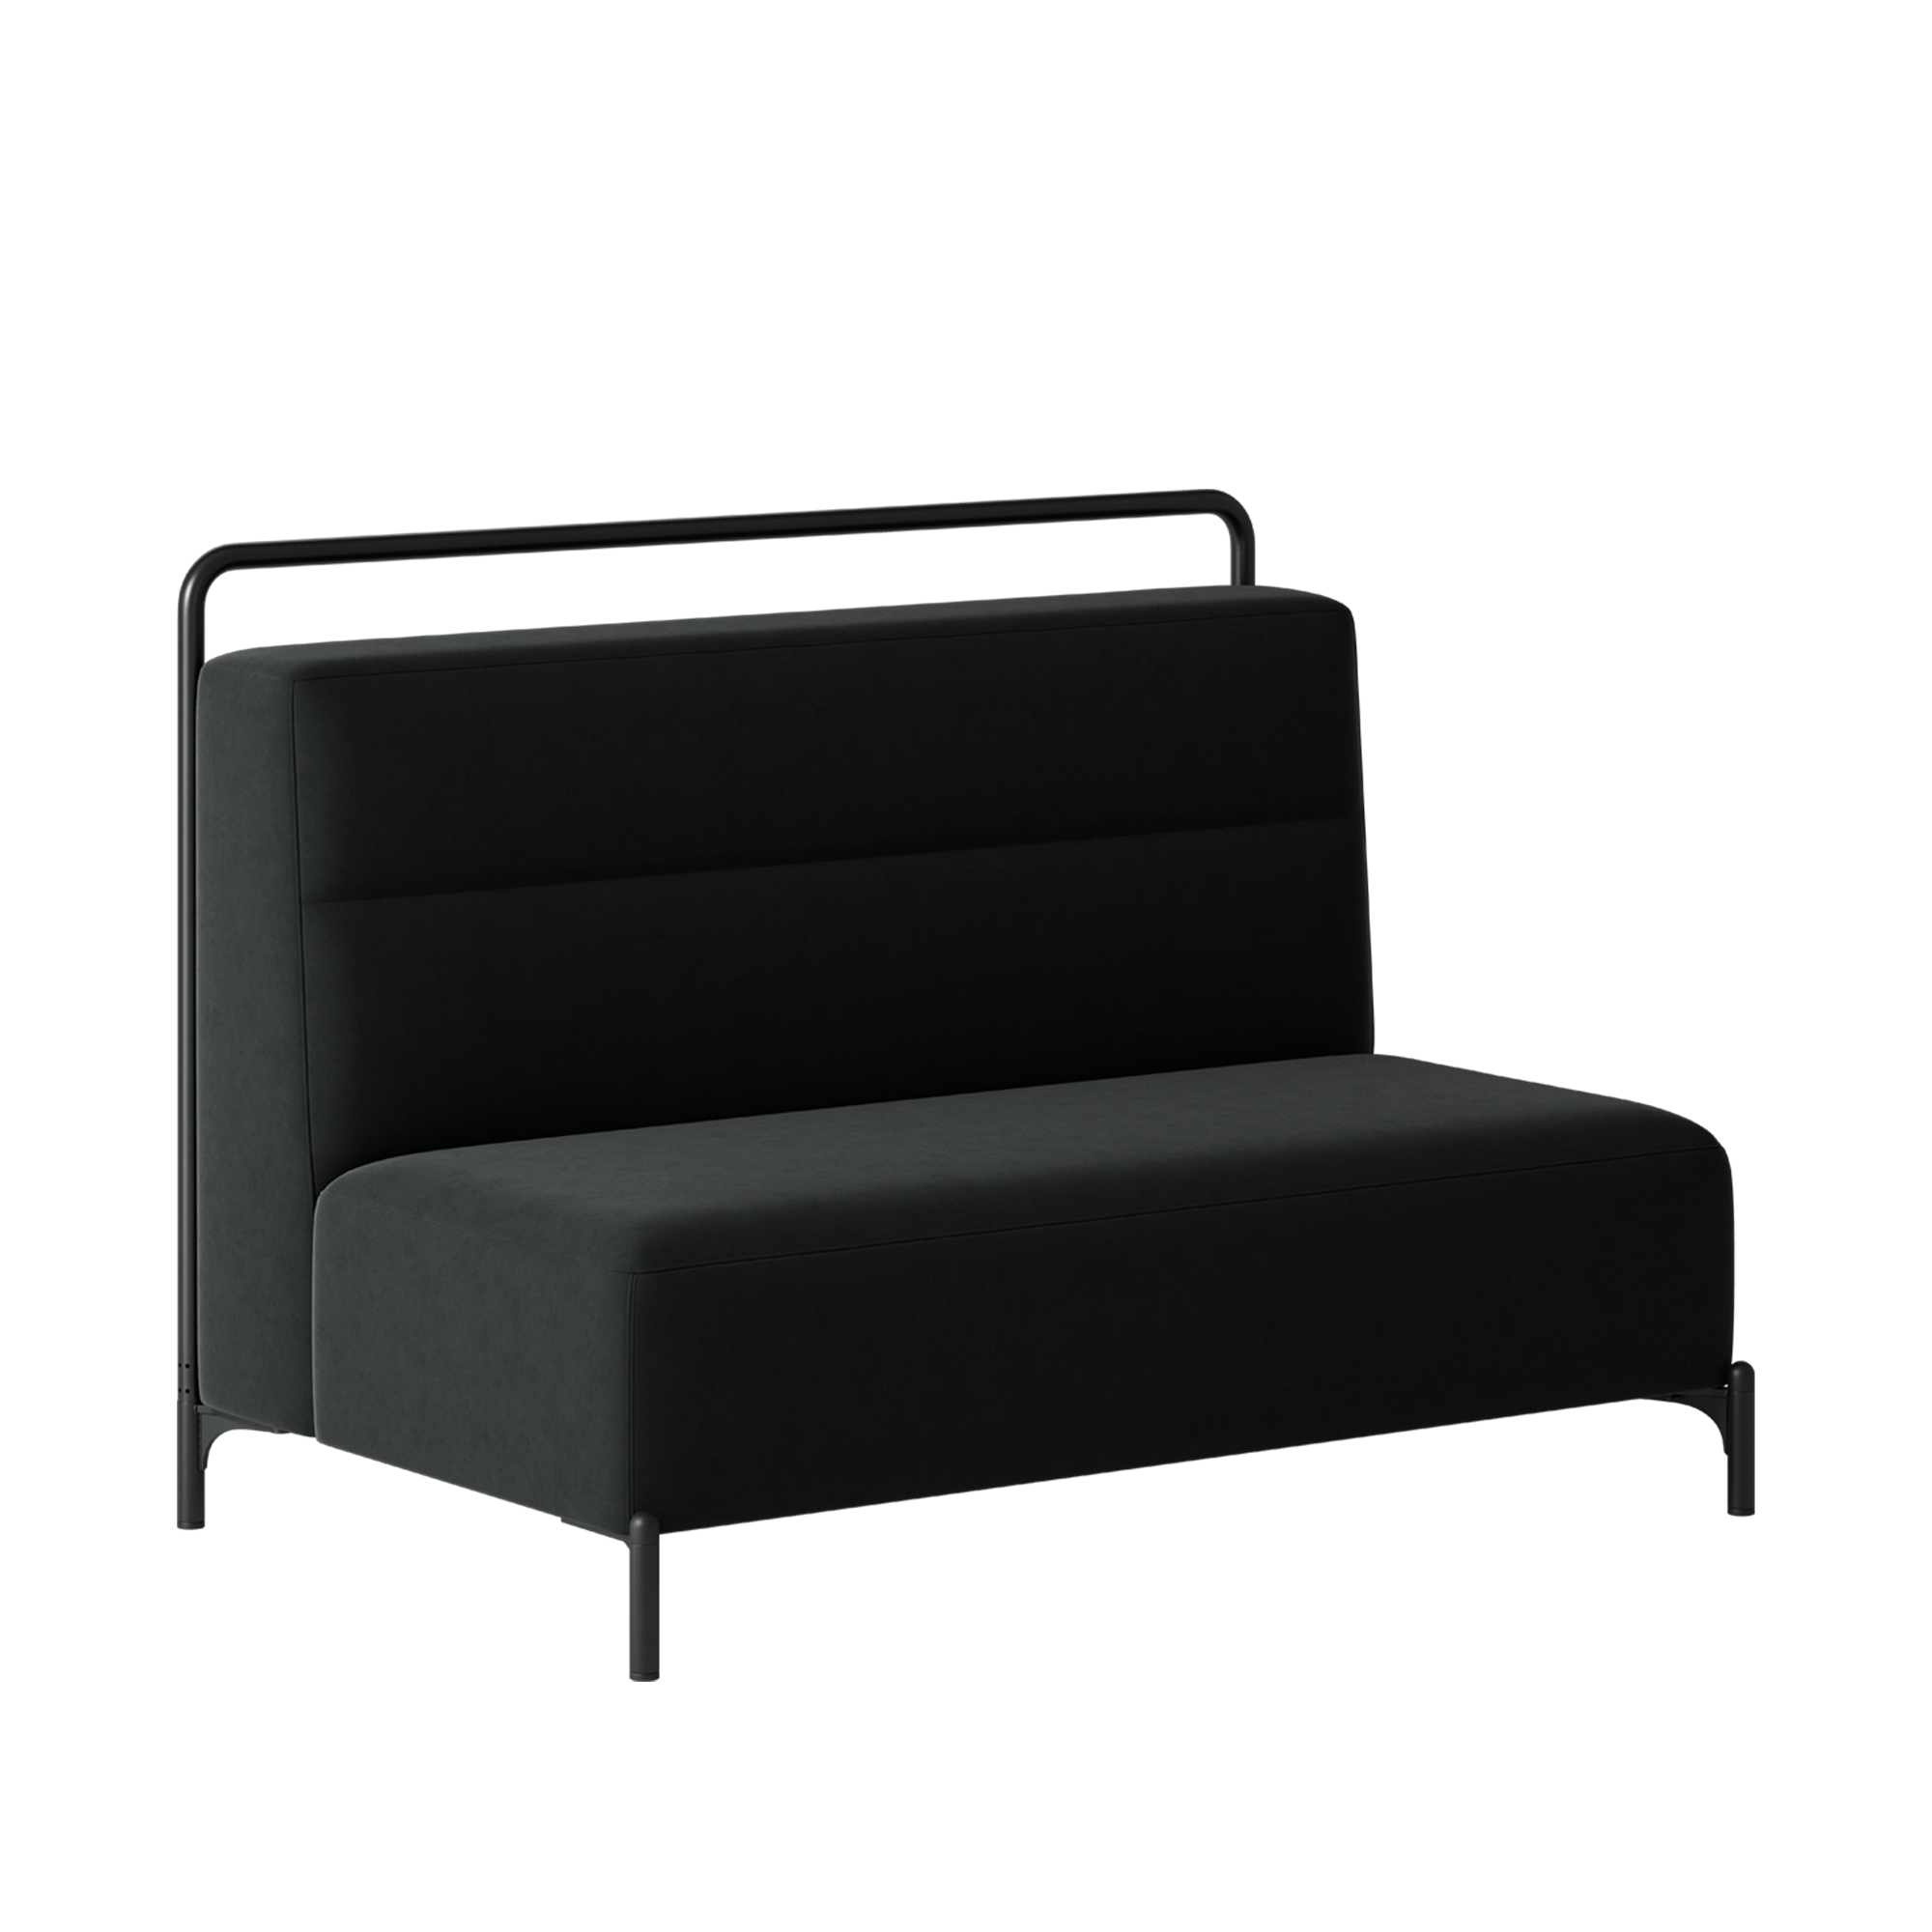 A black sofa with a metal frame on a white background.